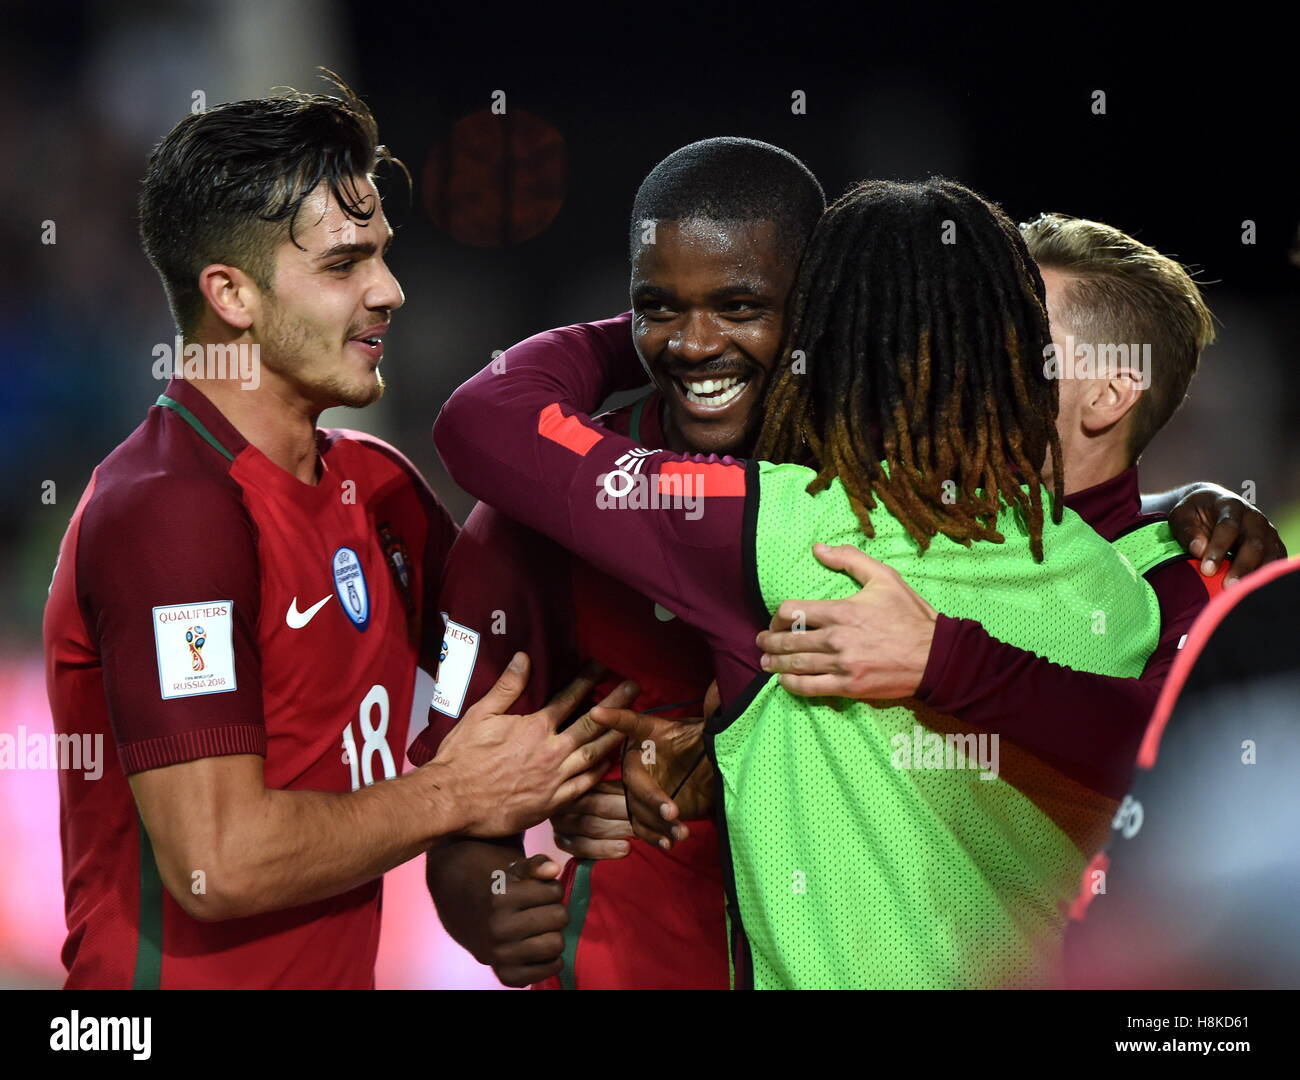 Faro, Portugal. 13th Nov, 2016. Portugal's William Carvalho (2nd L) celebrates after scoring during the FIFA World Cup 2018 qualifier Group B match between Portugal and Latvia at the Algarve stadium in Faro, Portugal, on Nov. 13, 2016. Portugal won 4-1. Credit:  Zhang Liyun/Xinhua/Alamy Live News Stock Photo